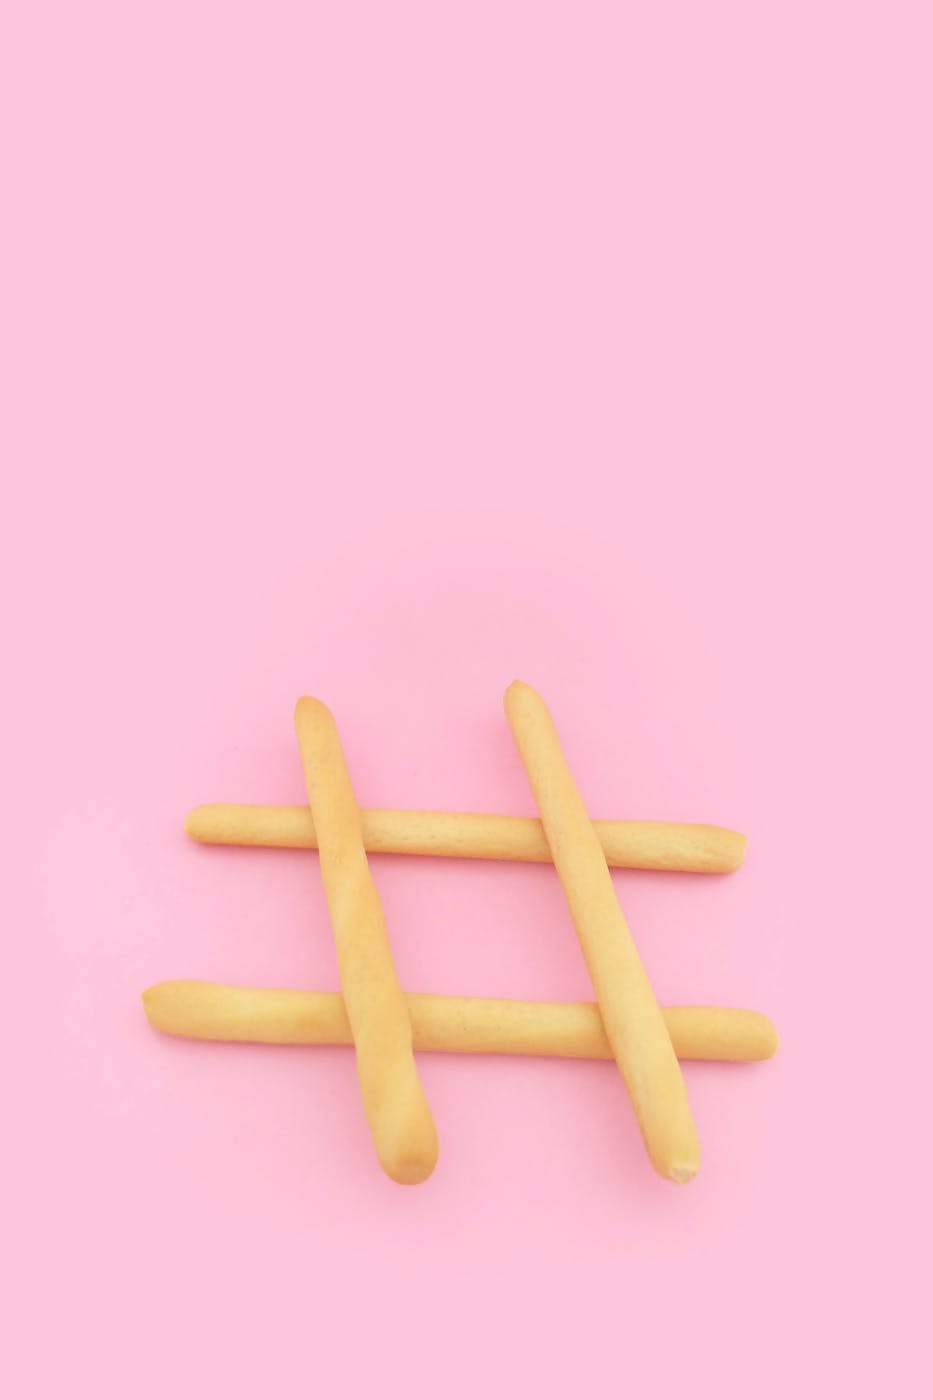 a hashtag made from four baguettes in front of a pink background